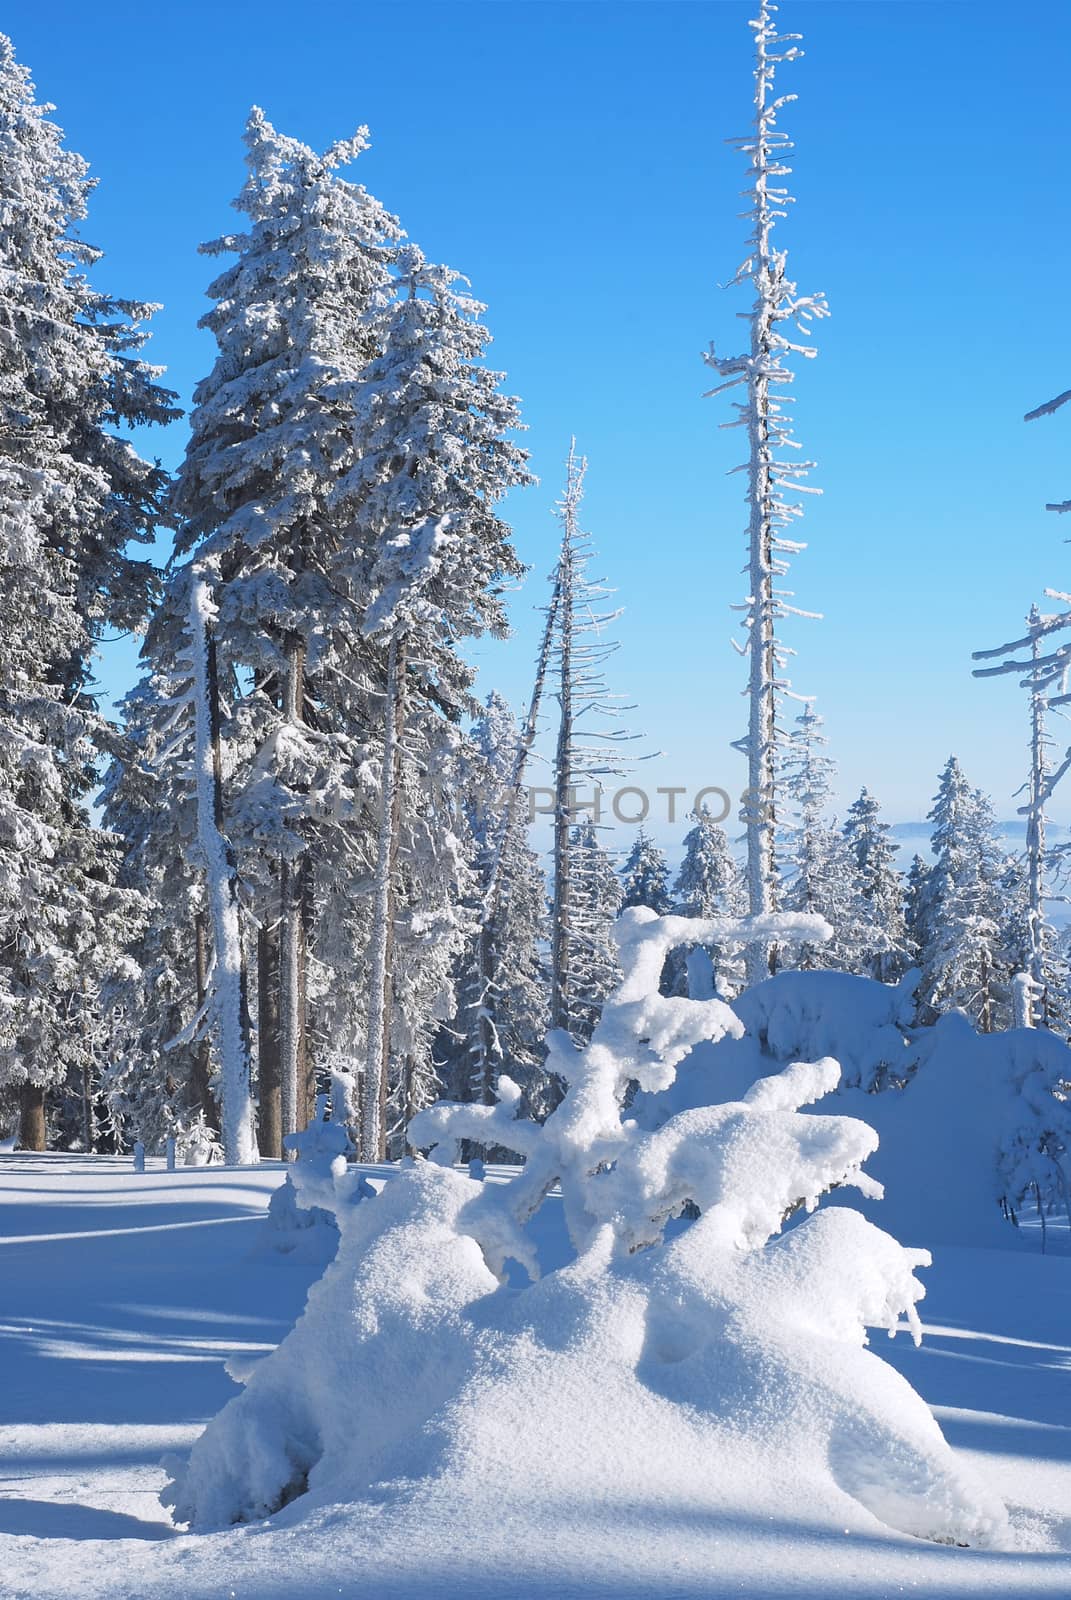 trees and forest, covered with snow with a blue sky